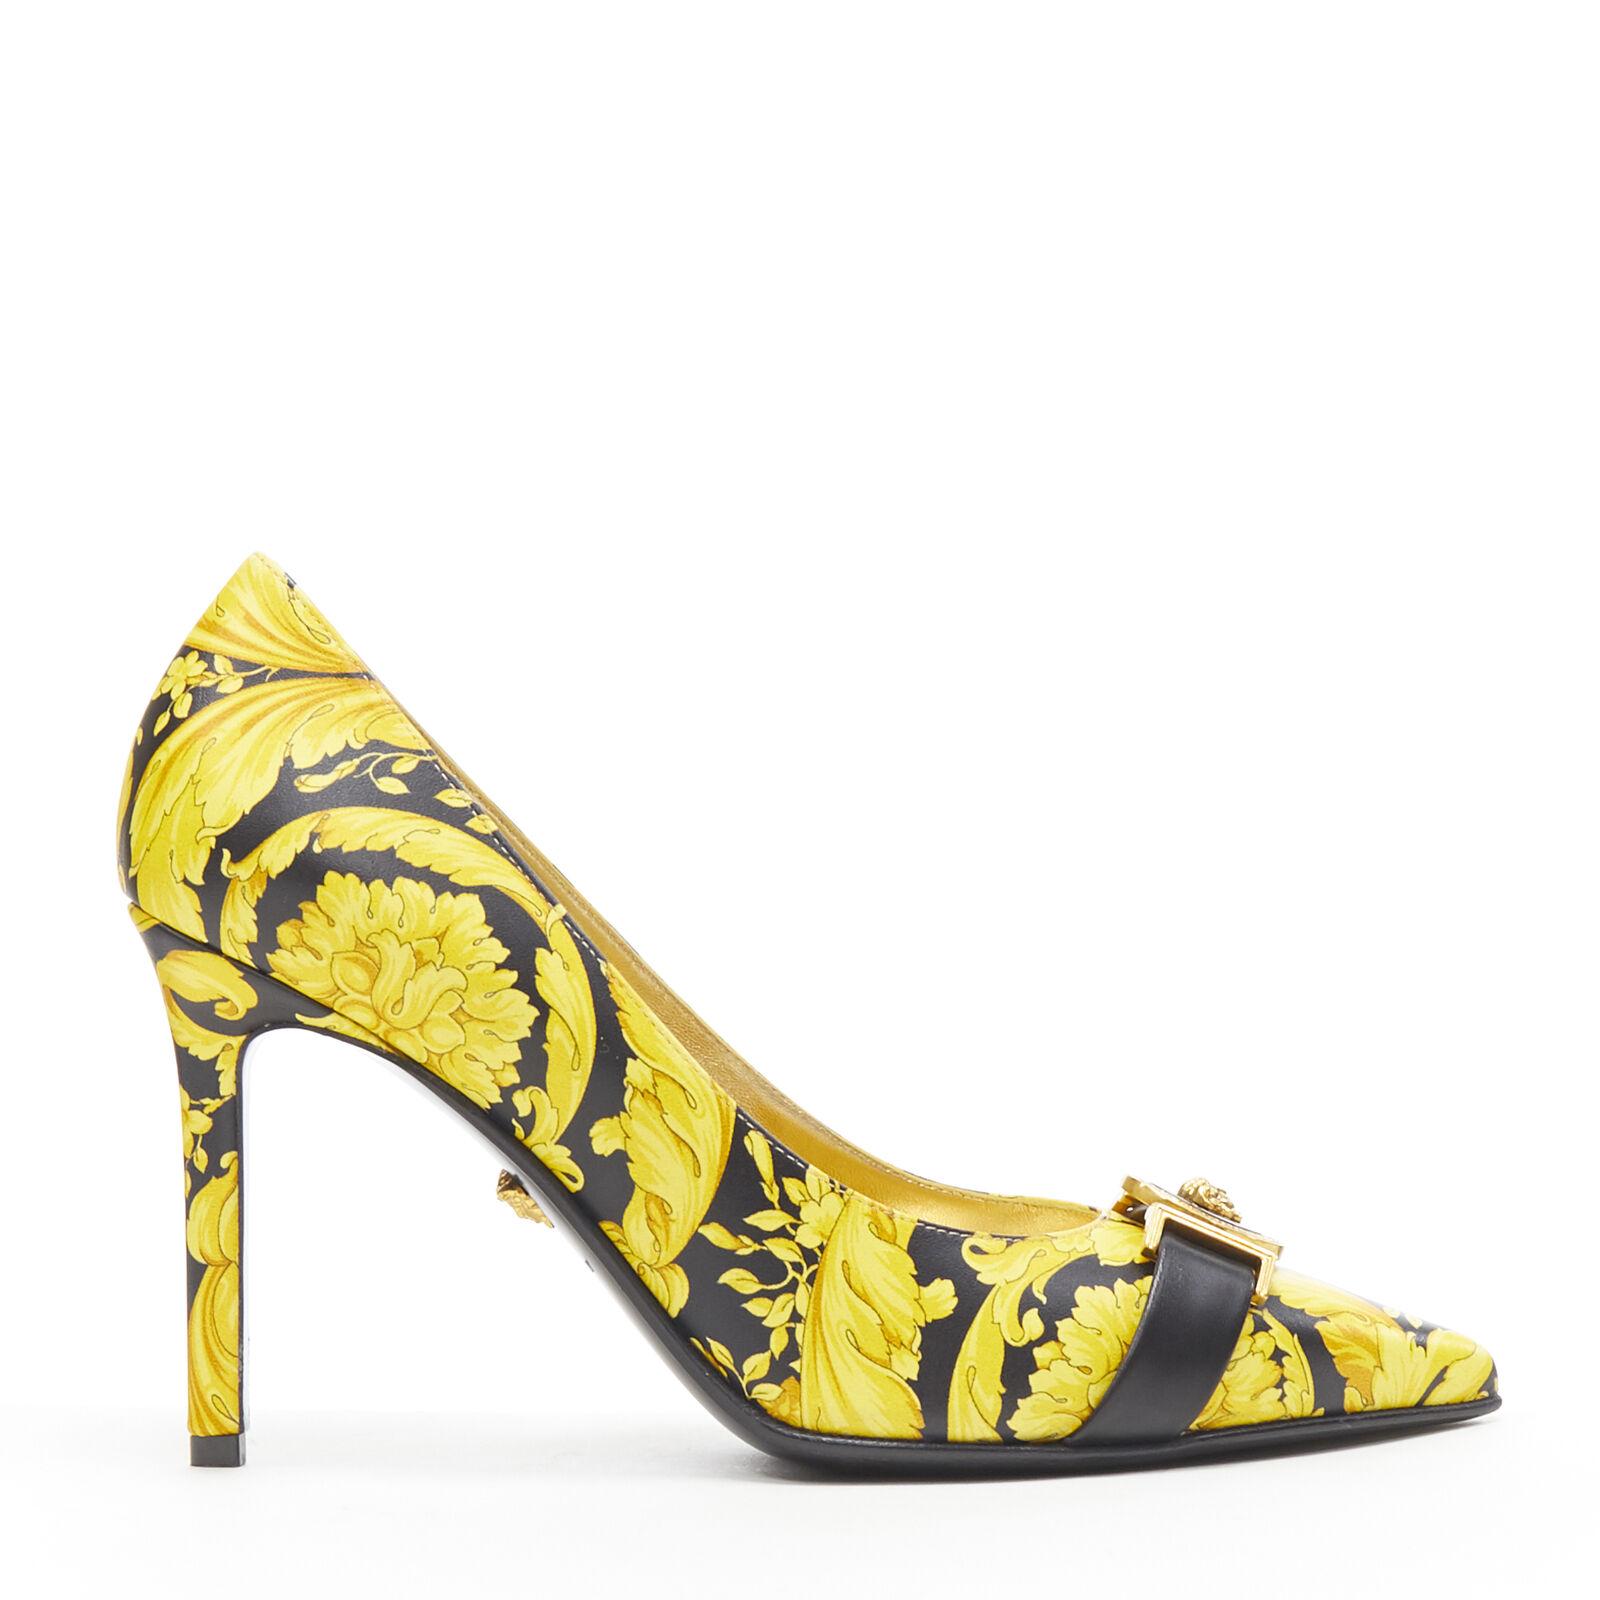 new VERSACE Tribute Baroque 1992 Hibiscus barocco Medusa strap leather heel EU39
Reference: TGAS/B00024
Brand: Versace
Designer: Donatella Versace
Model: Baroque pump
Collection: Spring Summer 2018
Material: Leather
Color: Gold, Black
Pattern: